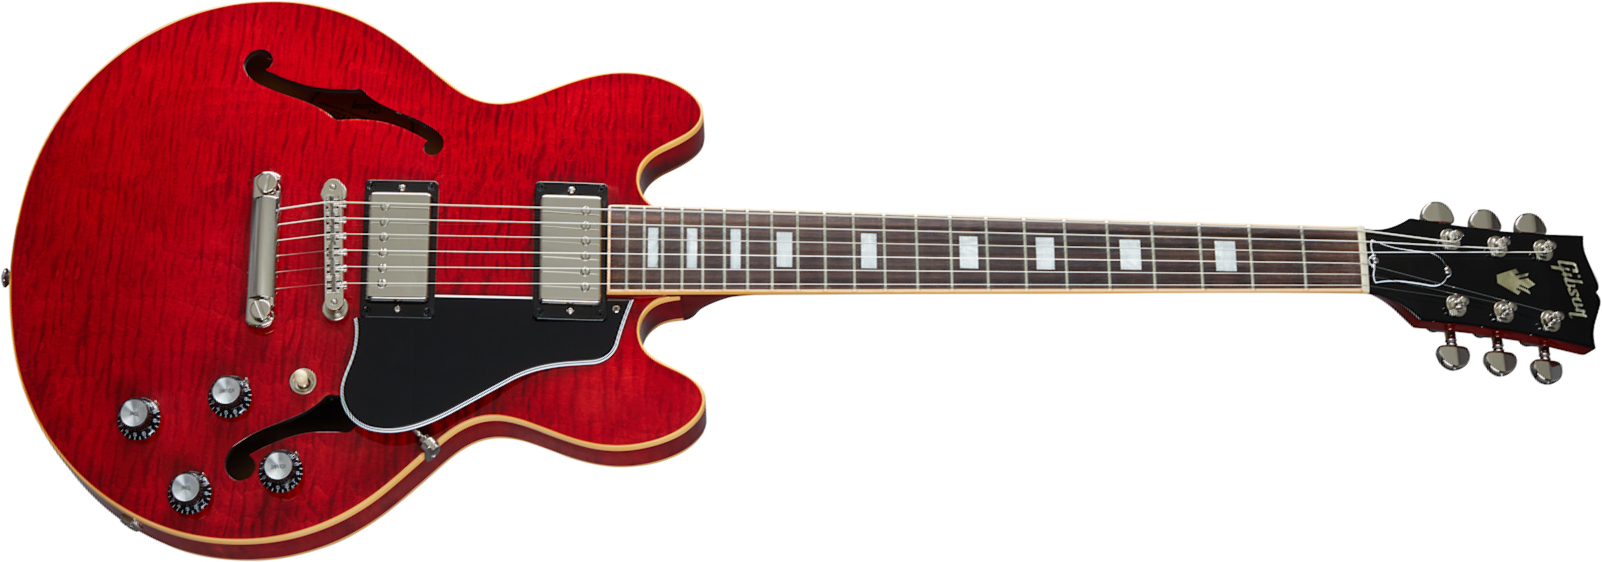 Gibson Es-339 Figured Modern 2020 2h Ht Rw - Sixties Cherry - Semi-hollow electric guitar - Main picture